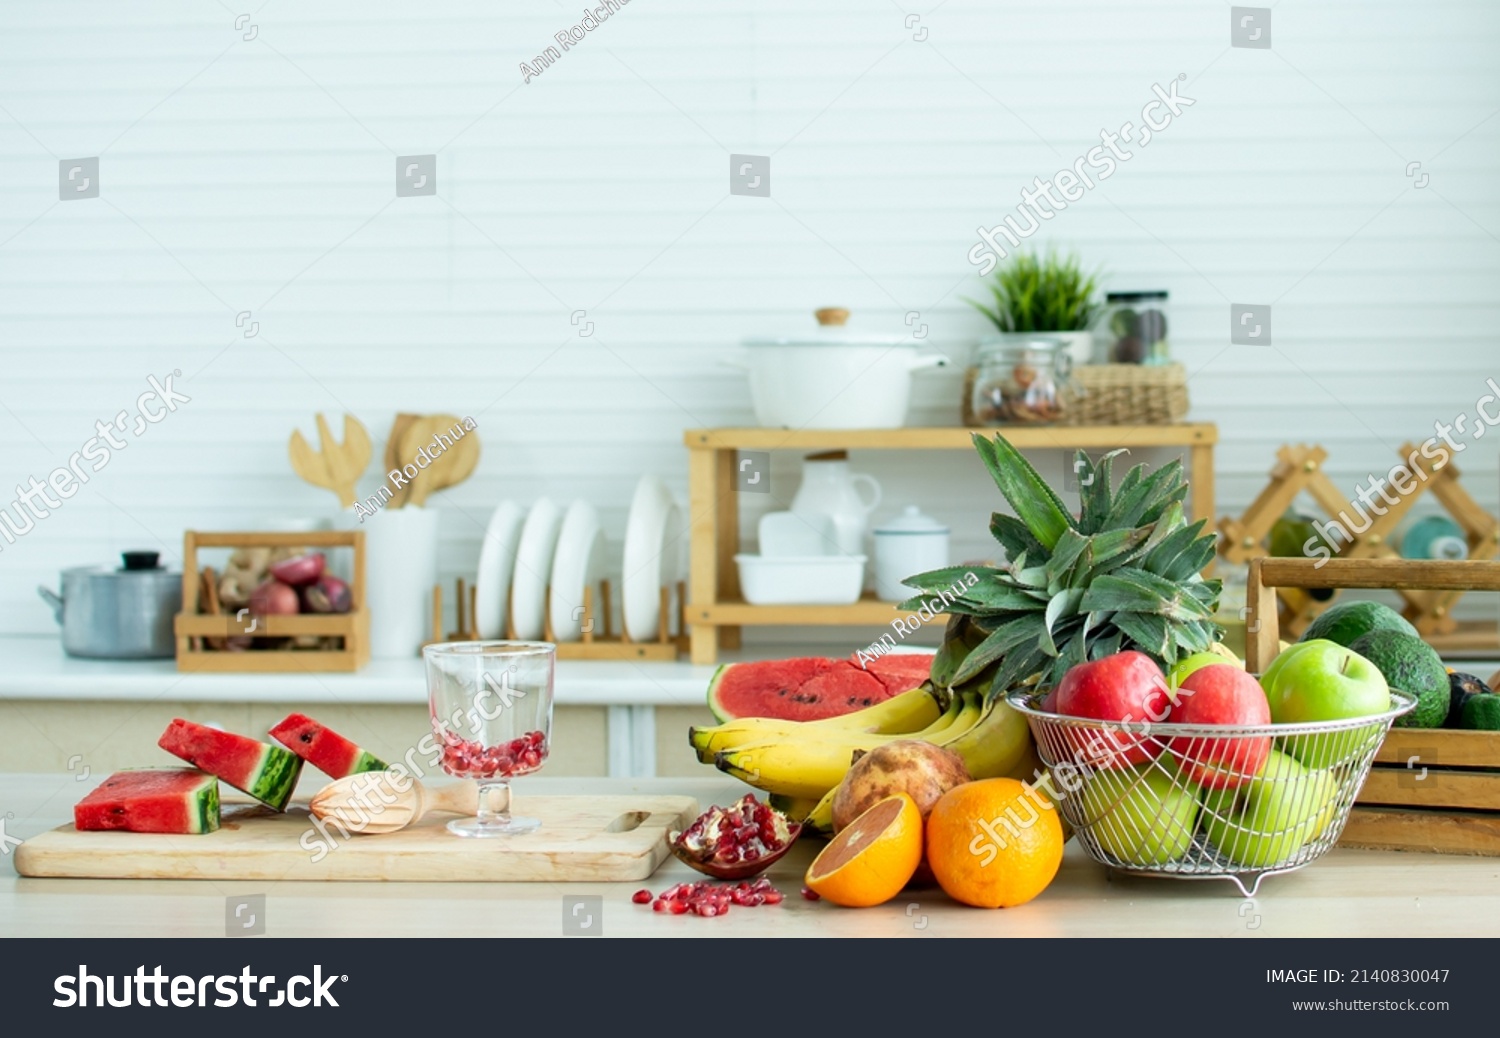 Stock Photo Background With Nobody Of Fruits Pineapple Banana Pomegranate Red And Green Apples For Good 2140830047 